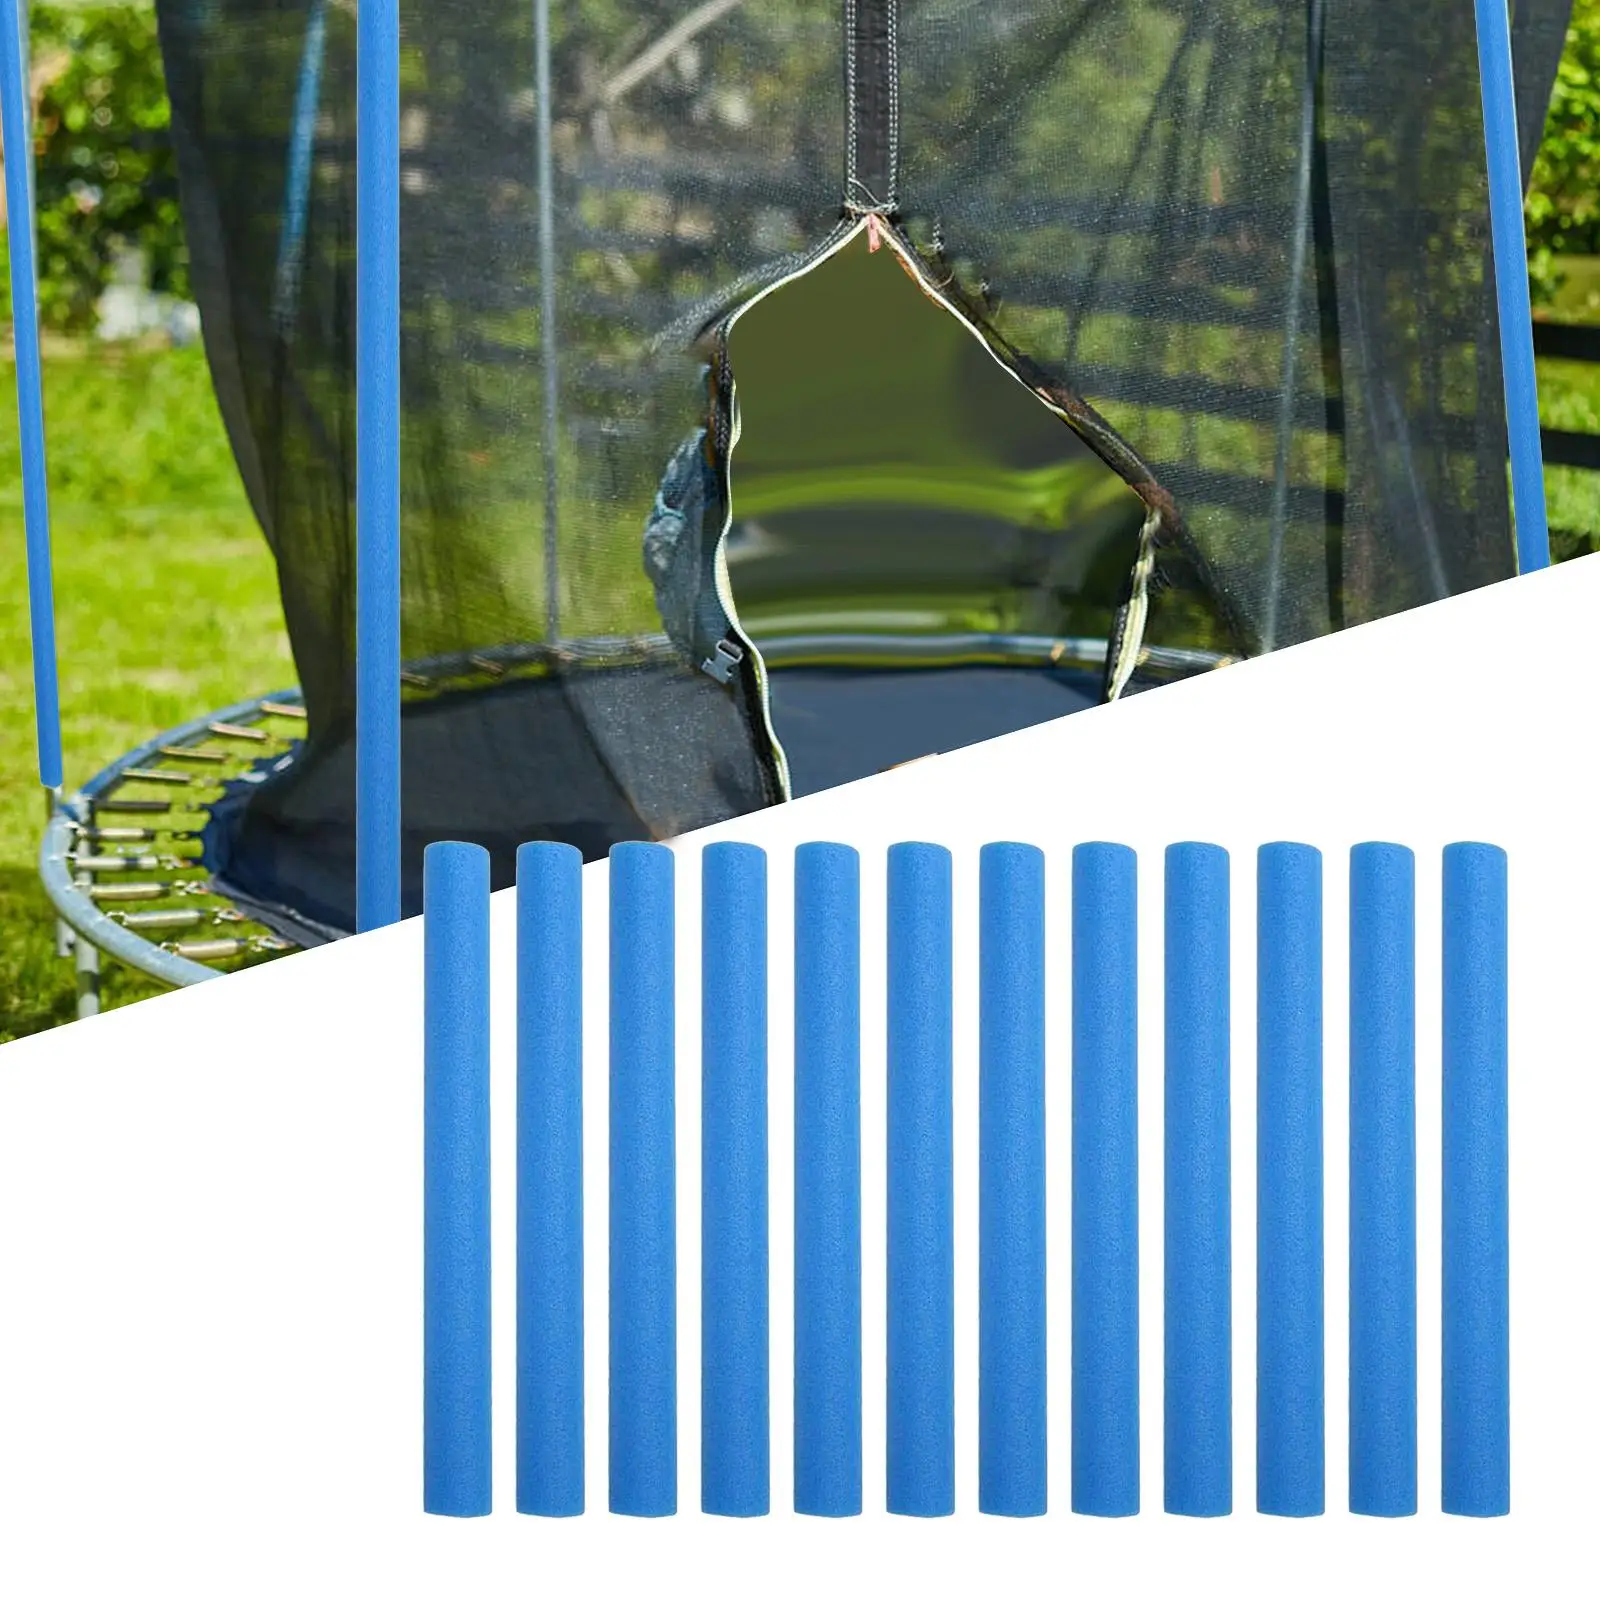 12x Trampoline Enclosure Pole Sleeves Replacement 40cm Protection Cover